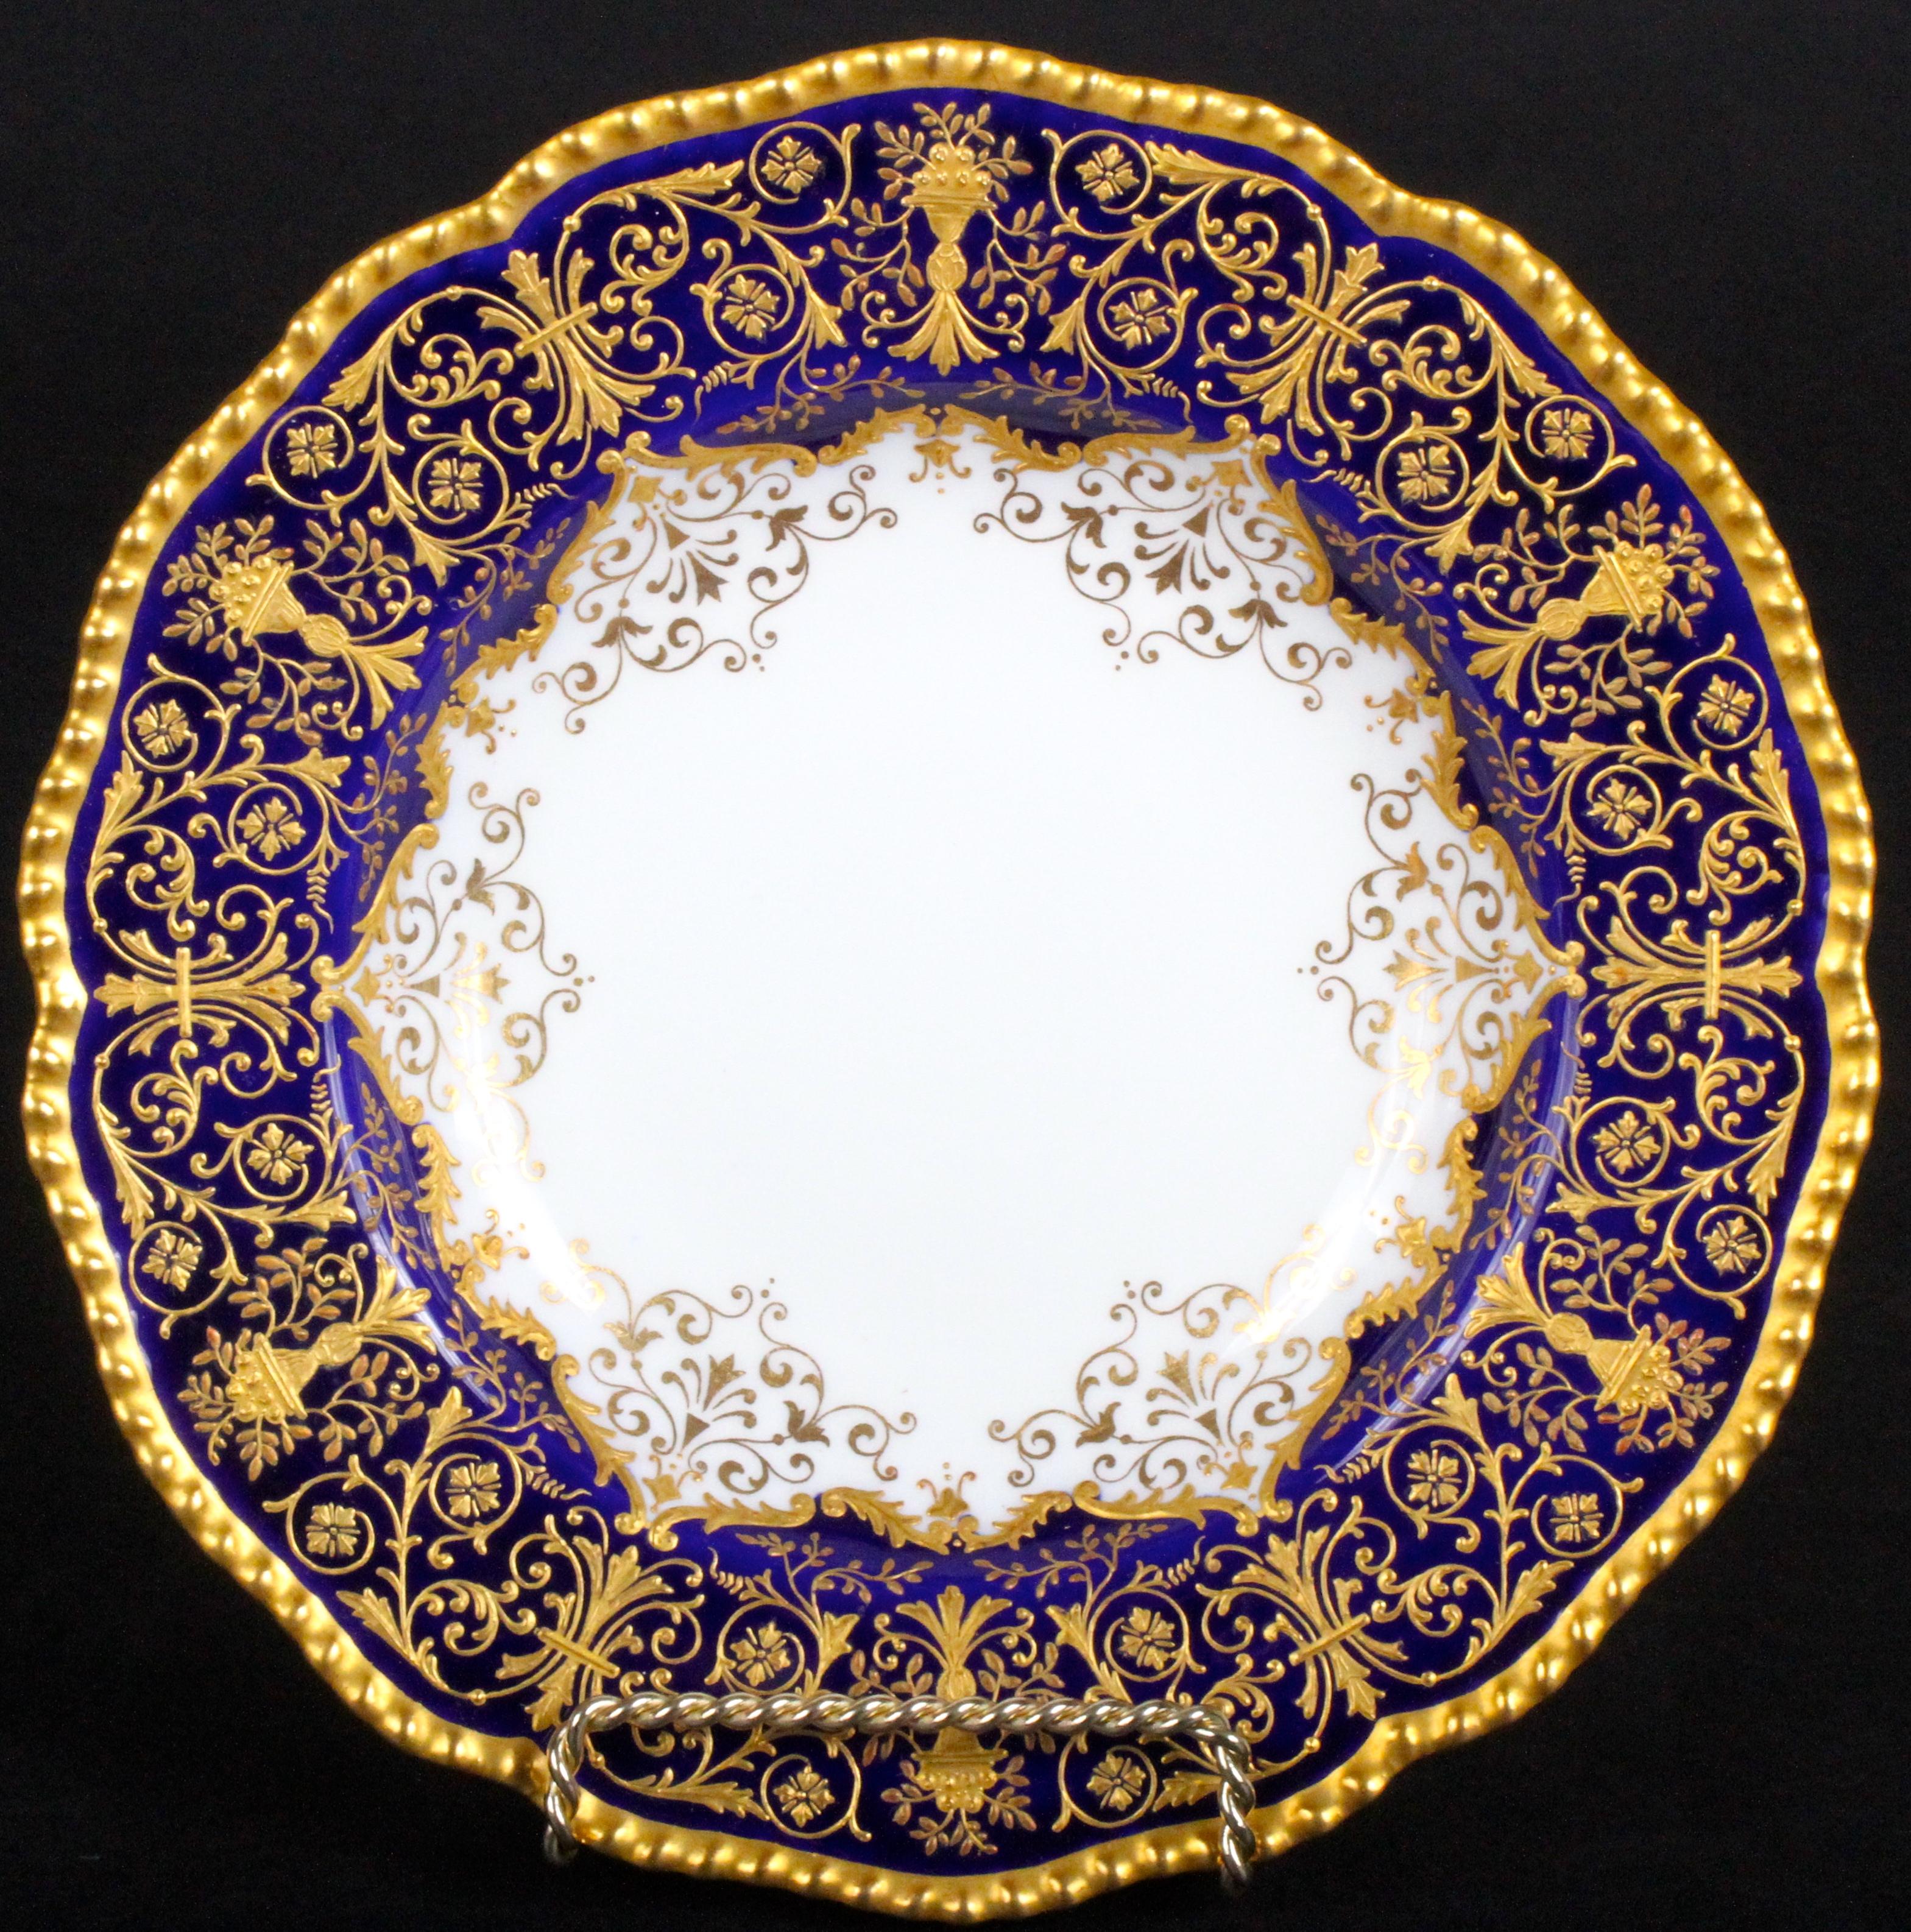 These 12 ornate soup plates are from the esteemed firm of Coalport, Shopshire, England. The soup plates feature wonderfully intricate raised-paste gold work of alternating ornaments of 2 different designs, one of a grand vase spewing meandering